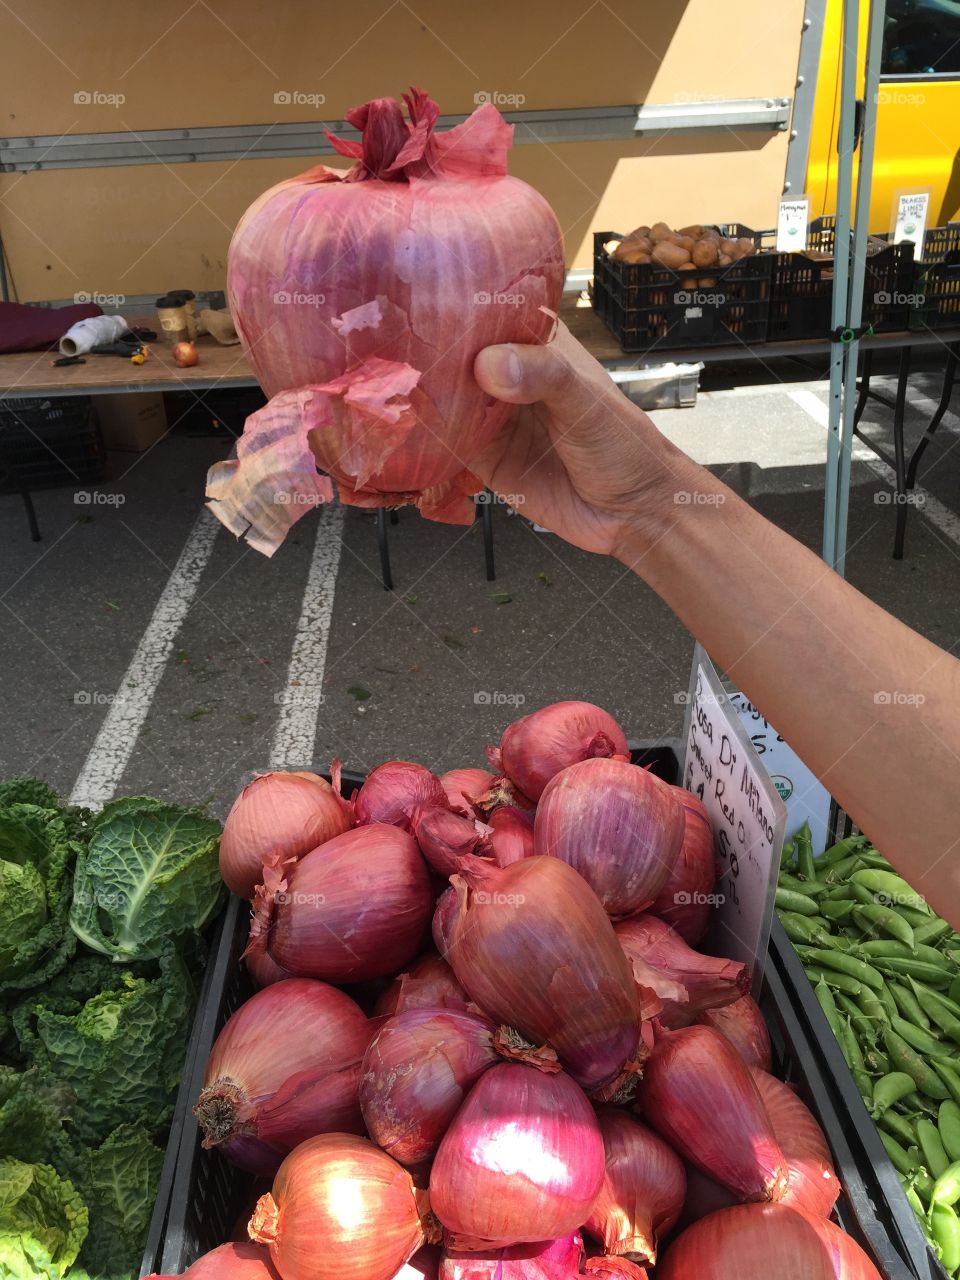 Trip to farmers market yielded one of the biggest onions I ever saw.